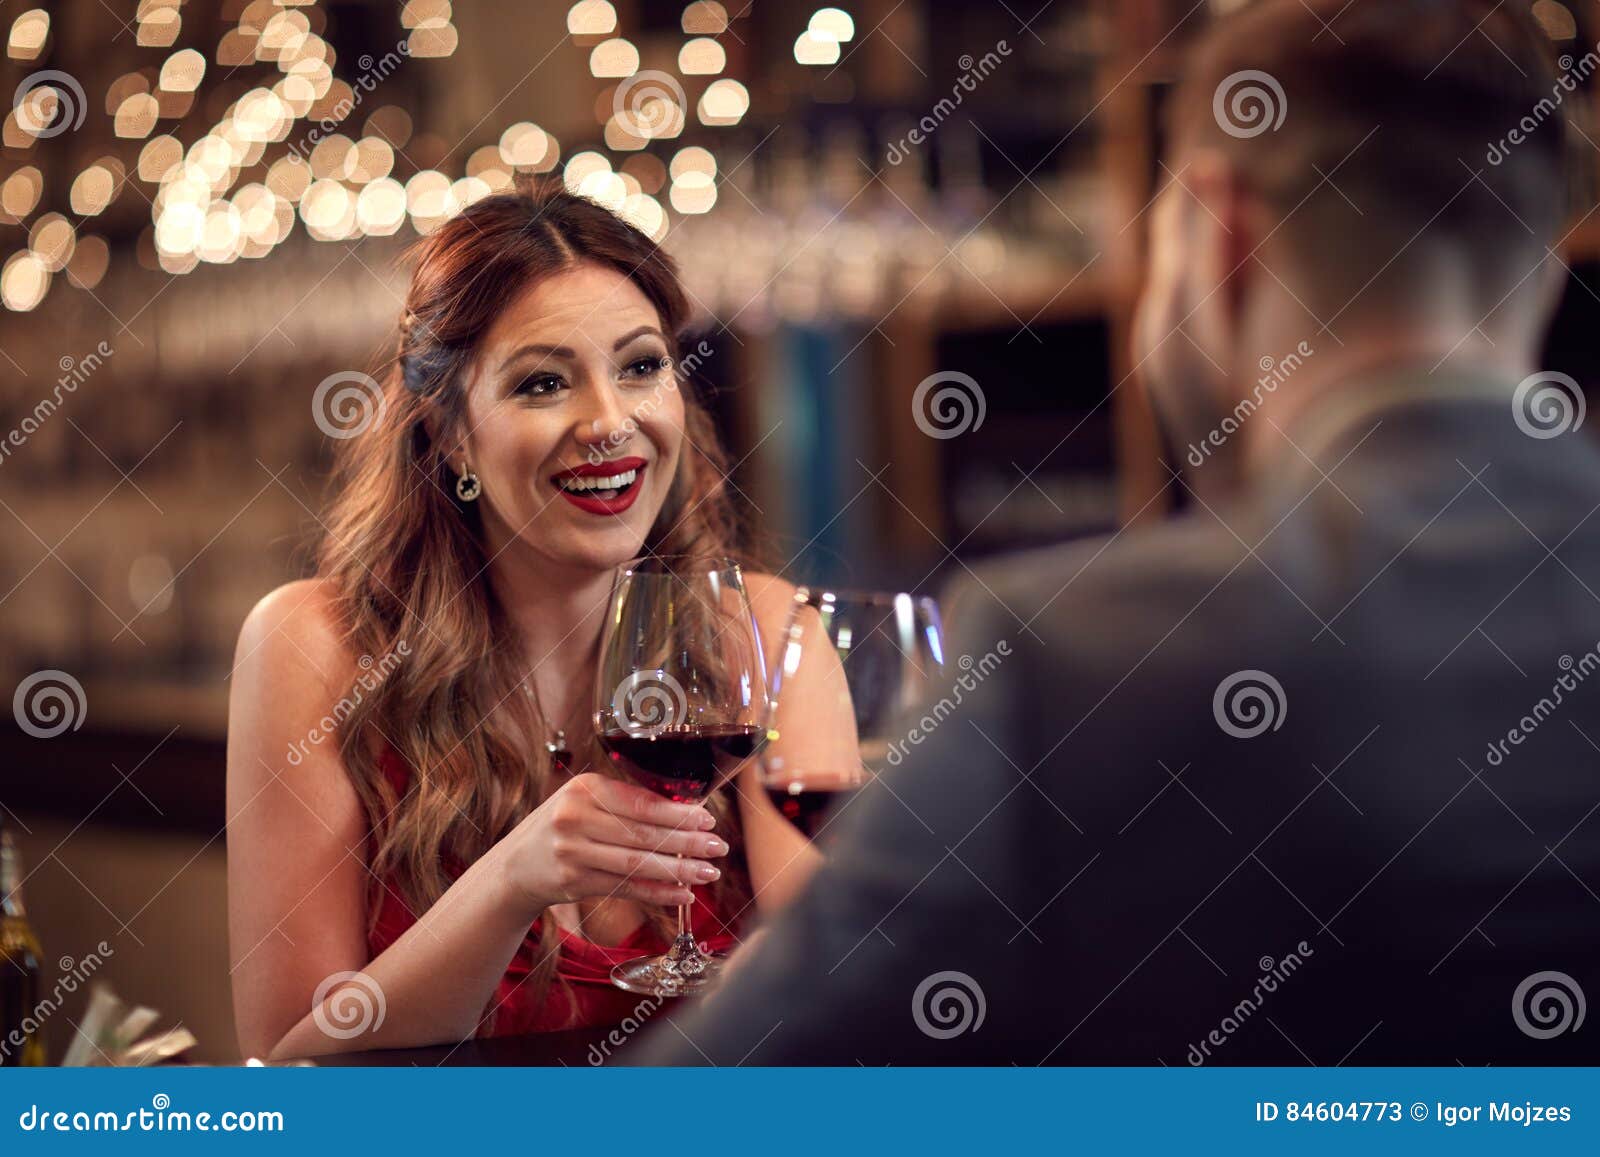 Conversation in Romantic Ambience Stock Image - Image of beautiful ...